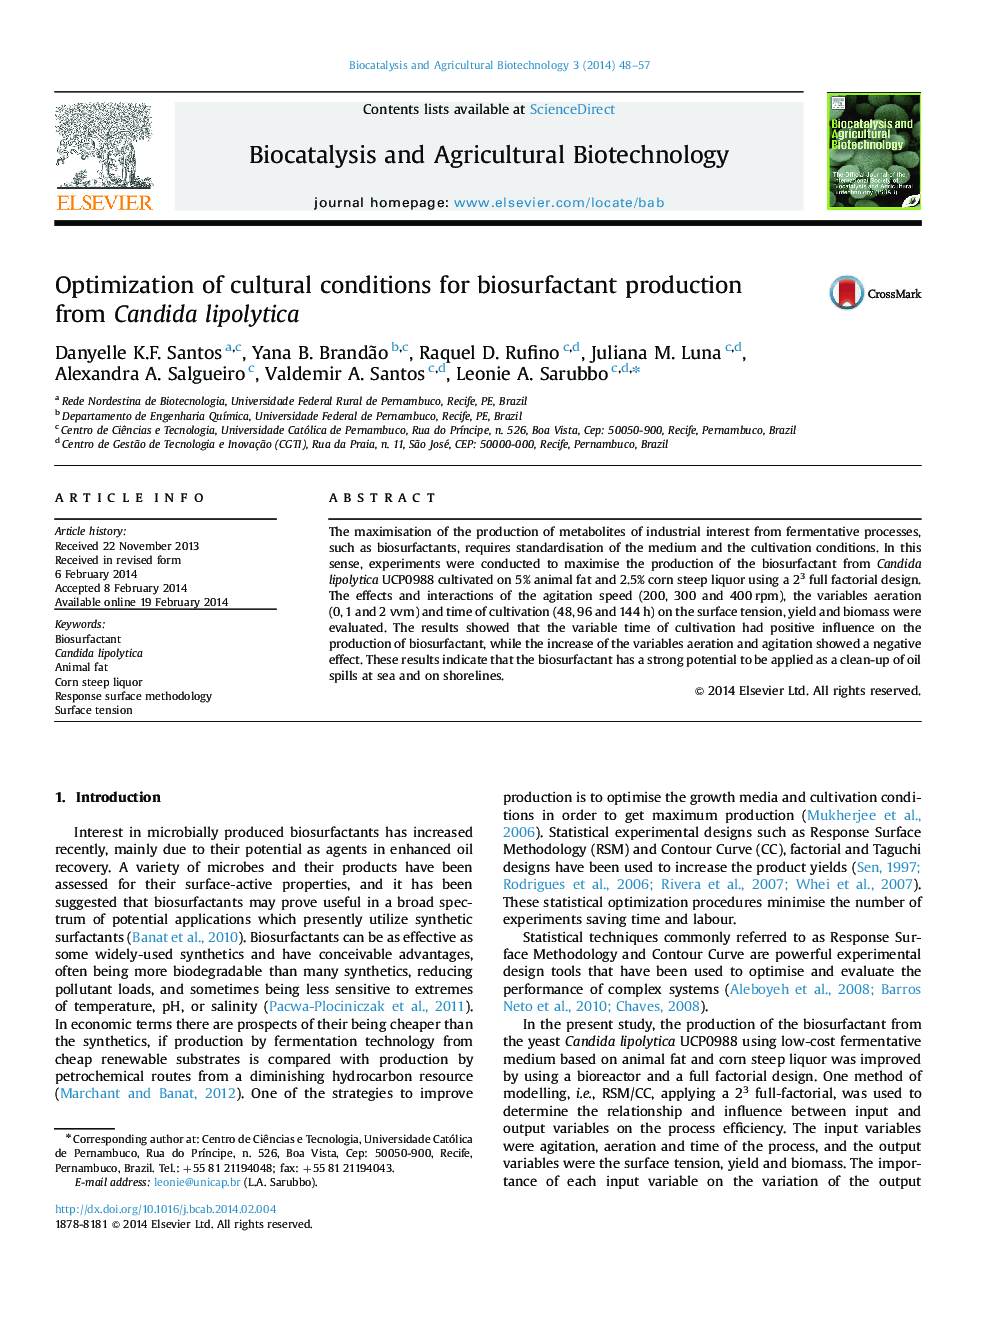 Optimization of cultural conditions for biosurfactant production from Candida lipolytica